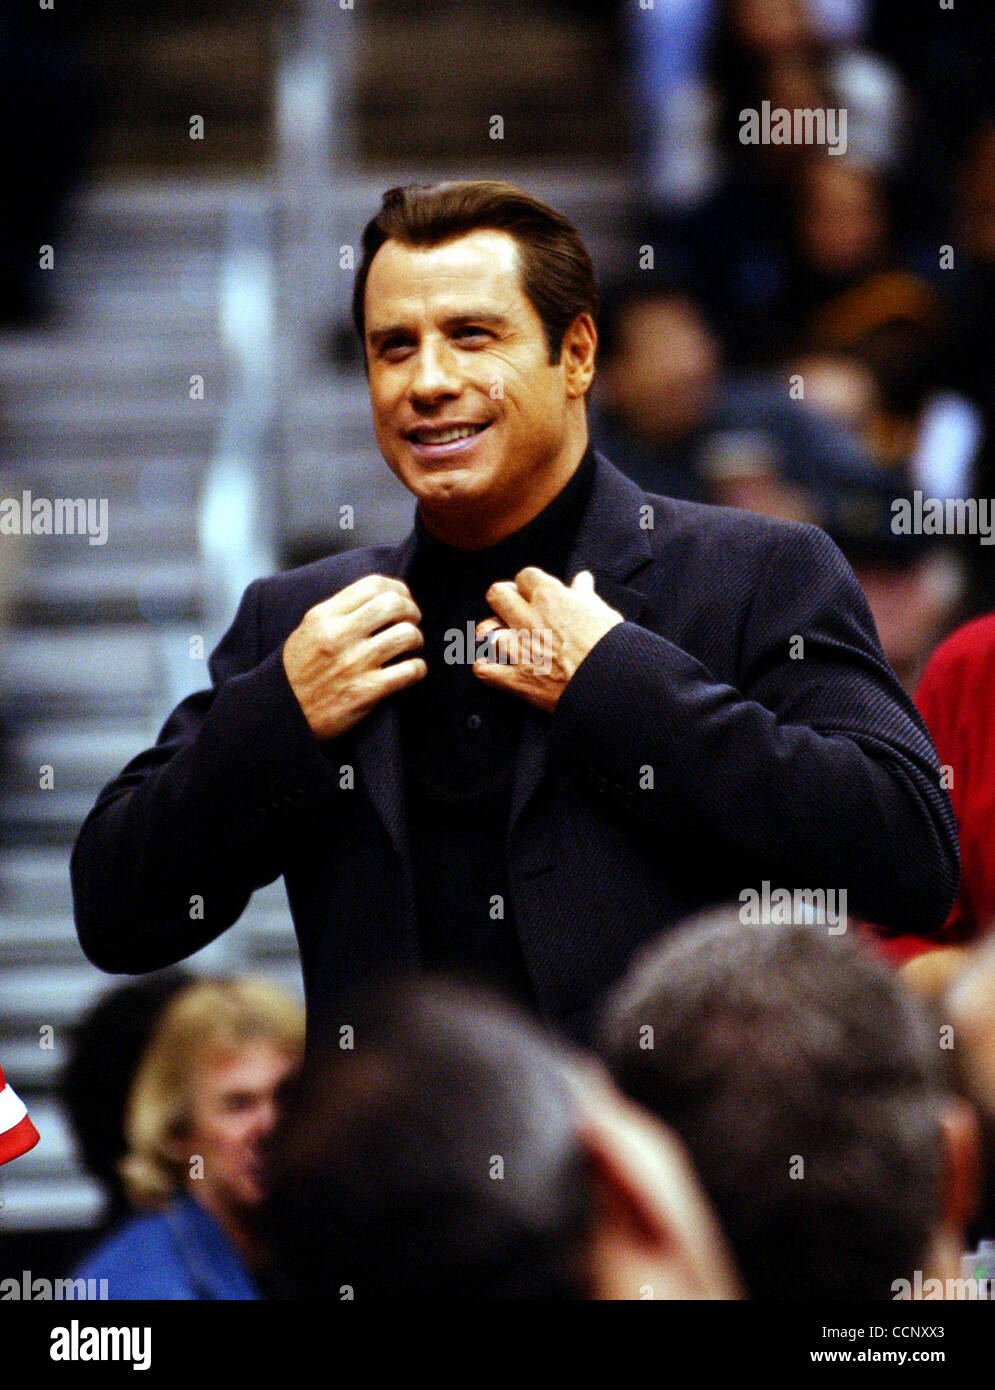 Feb 27, 2004; Los Angeles, CA, USA; Actors JOHN TRAVOLTA, Uma Thurman and musician Steven Tyler of 'Aerosmith' use Staples Center, during a Los Angeles Lakers game against the Sacramento Kings, as their stage while filming the sequel to 'Get Shortie' called 'Be Cool.' This is the first time John and Stock Photo